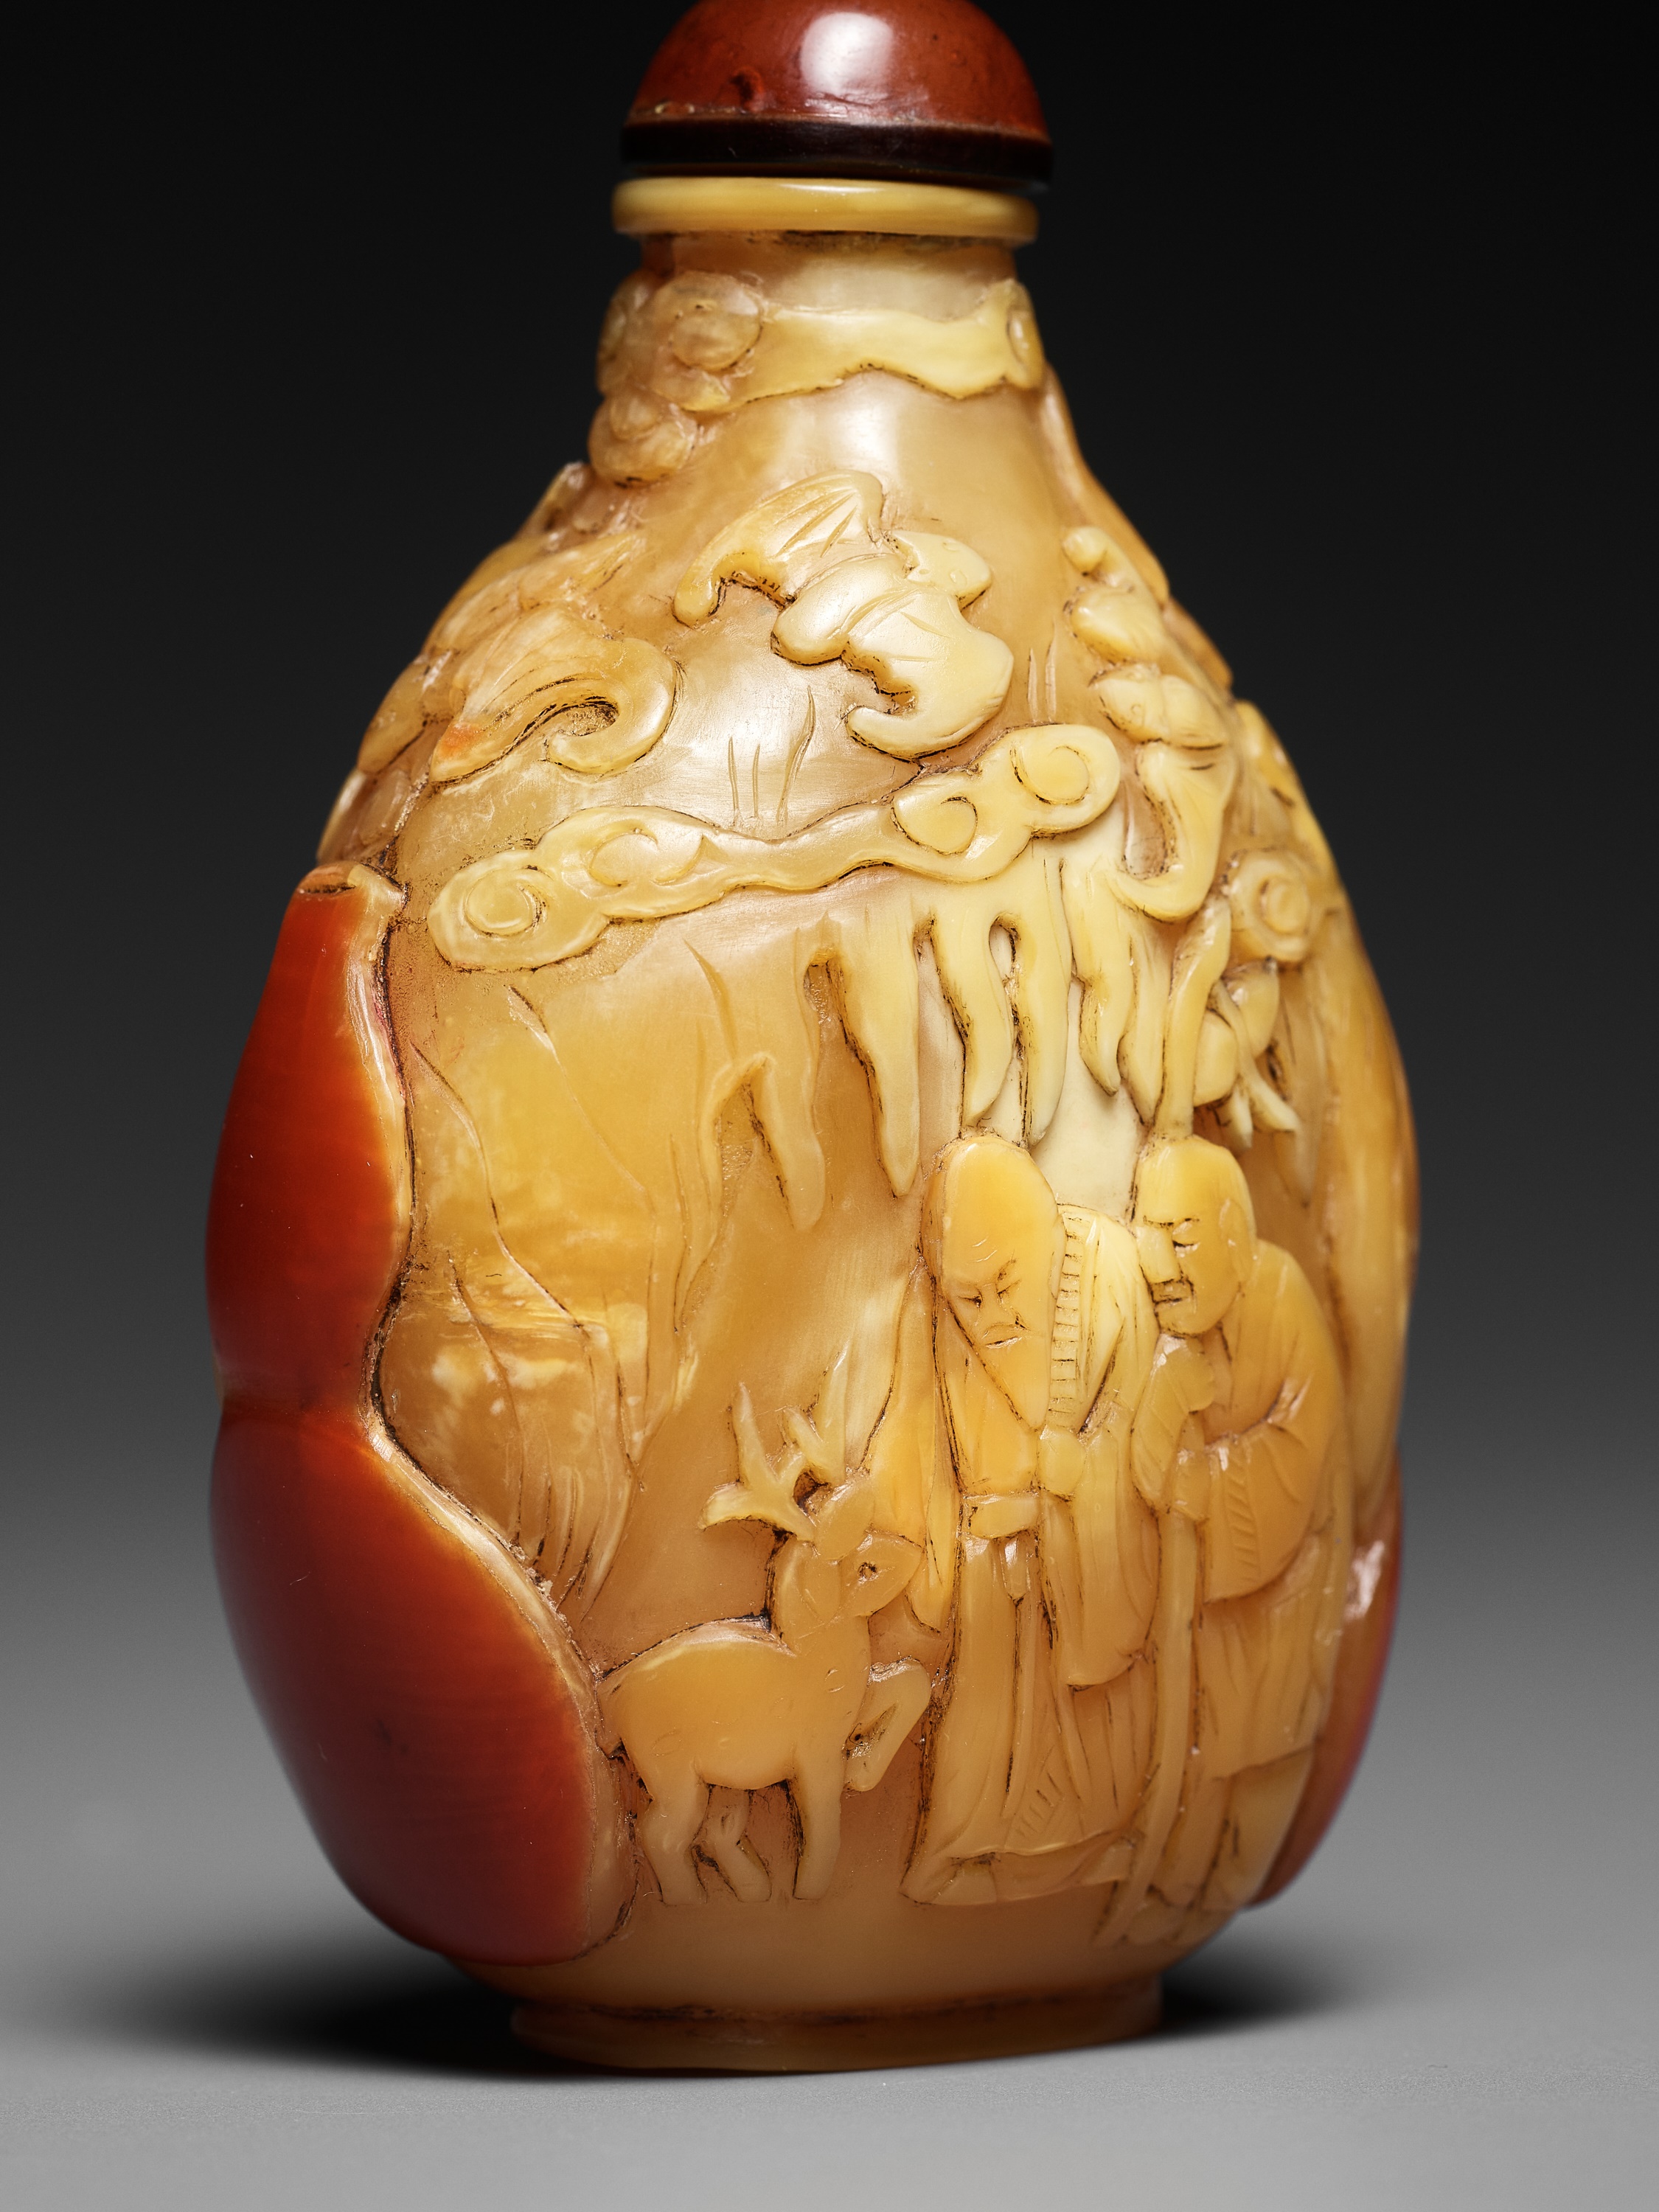 A RARE HORNBILL 'SANXING' SNUFF BOTTLE, EARLY 19TH CENTURY - Image 8 of 11